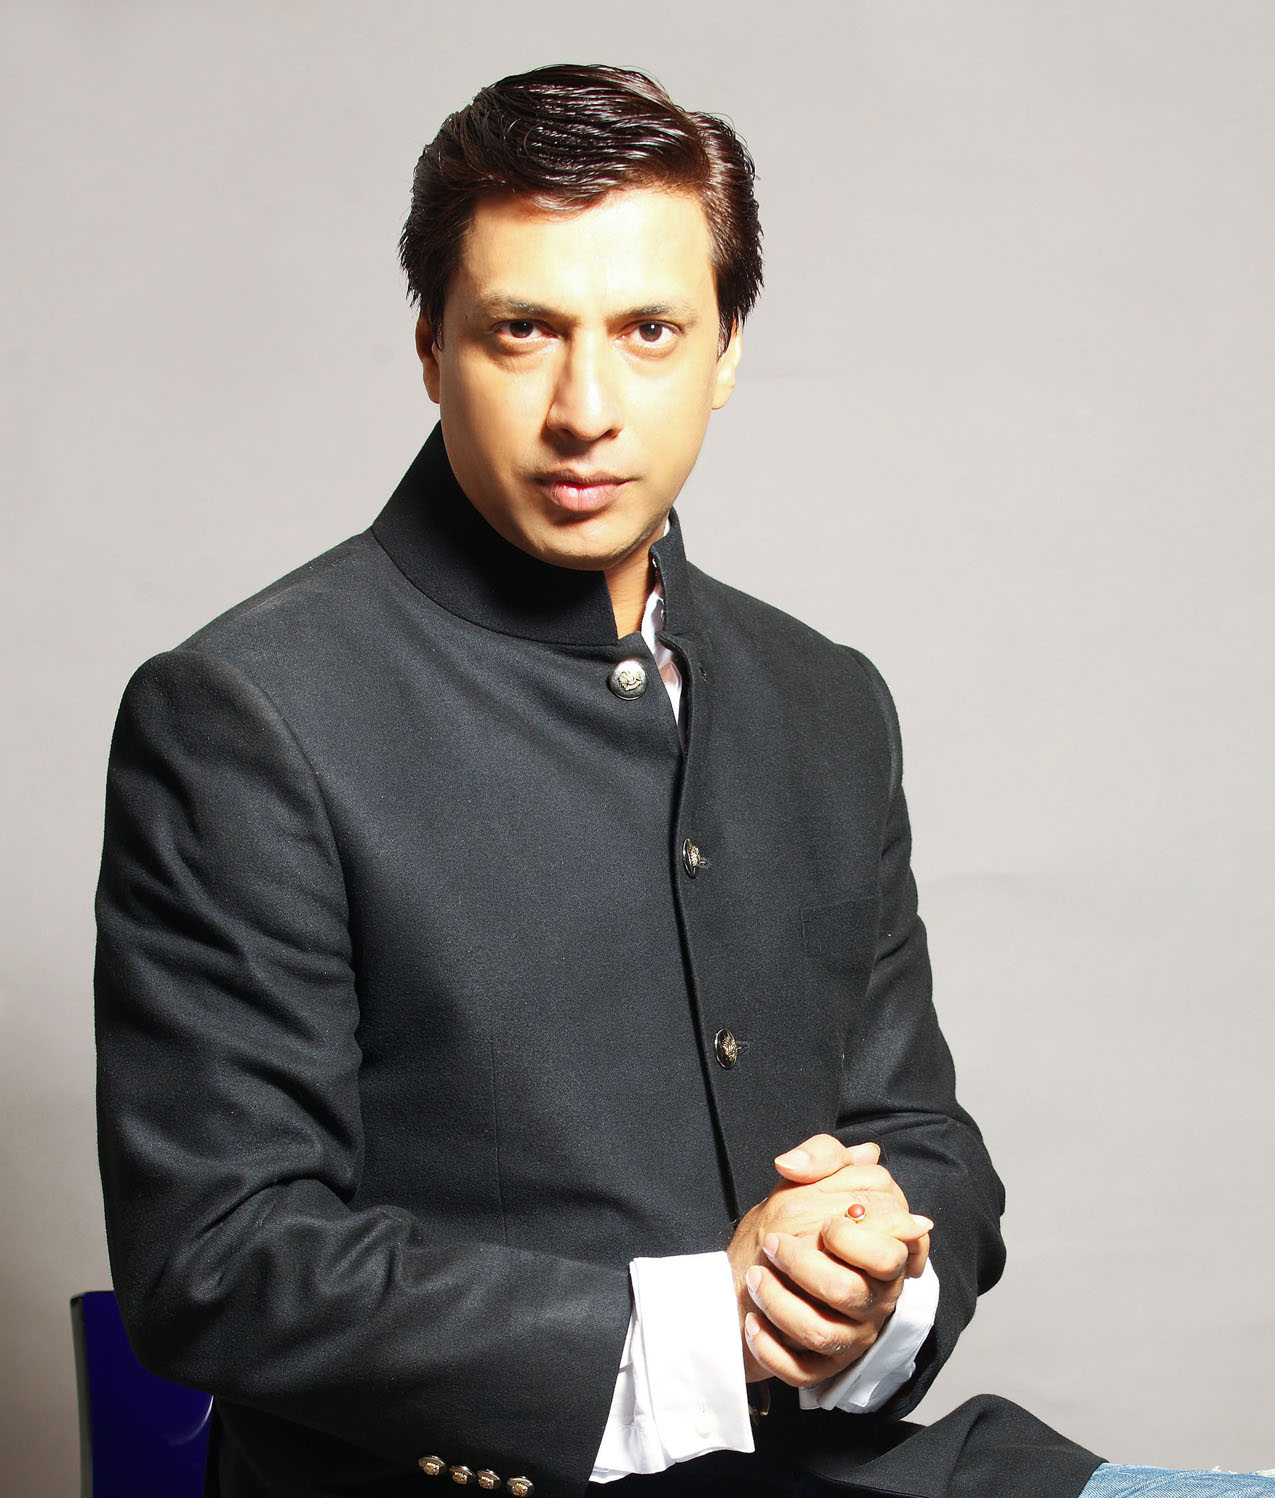 Madhur Bhandarkar returns to direction after two years, with a film on true  events – The Indian Wire